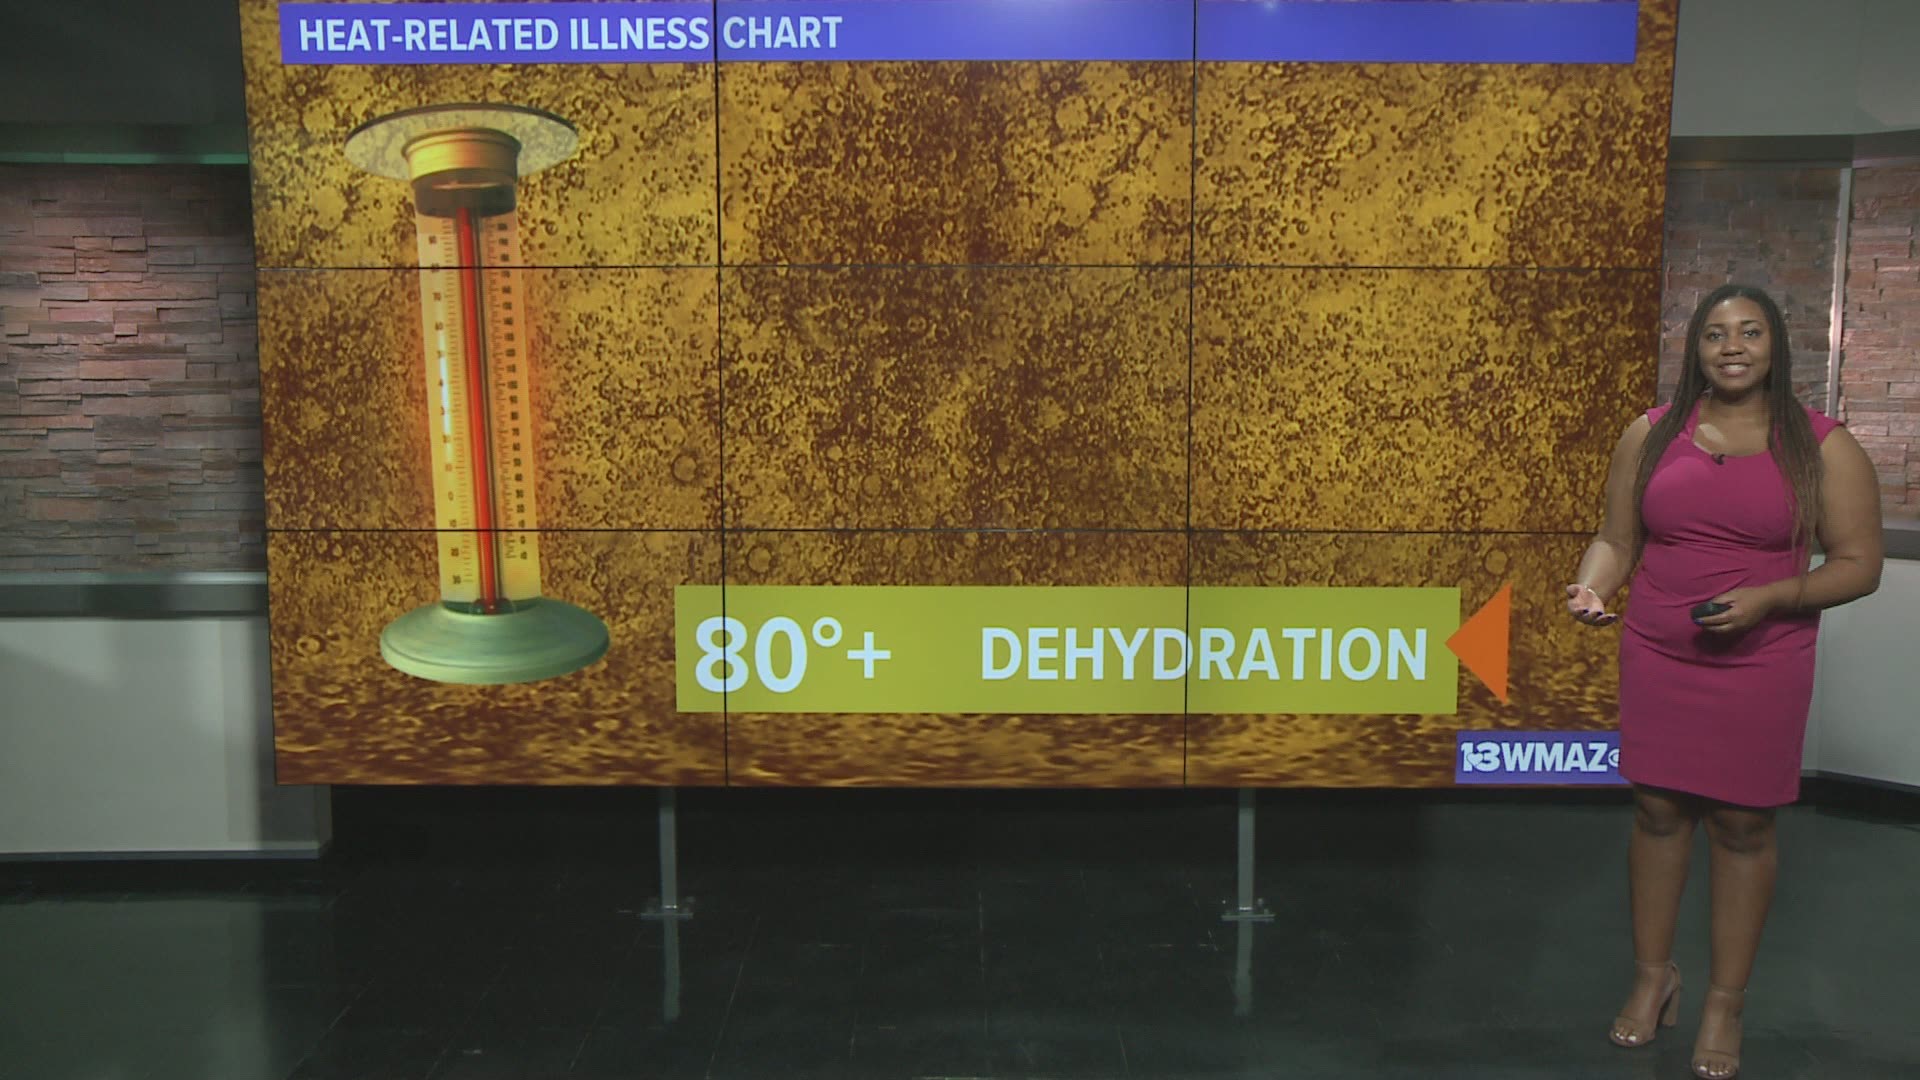 We are in the hottest part of year so heat-related illnesses are possible. Meteorologist Taylor Stephenson explores the link between the heat and illness.